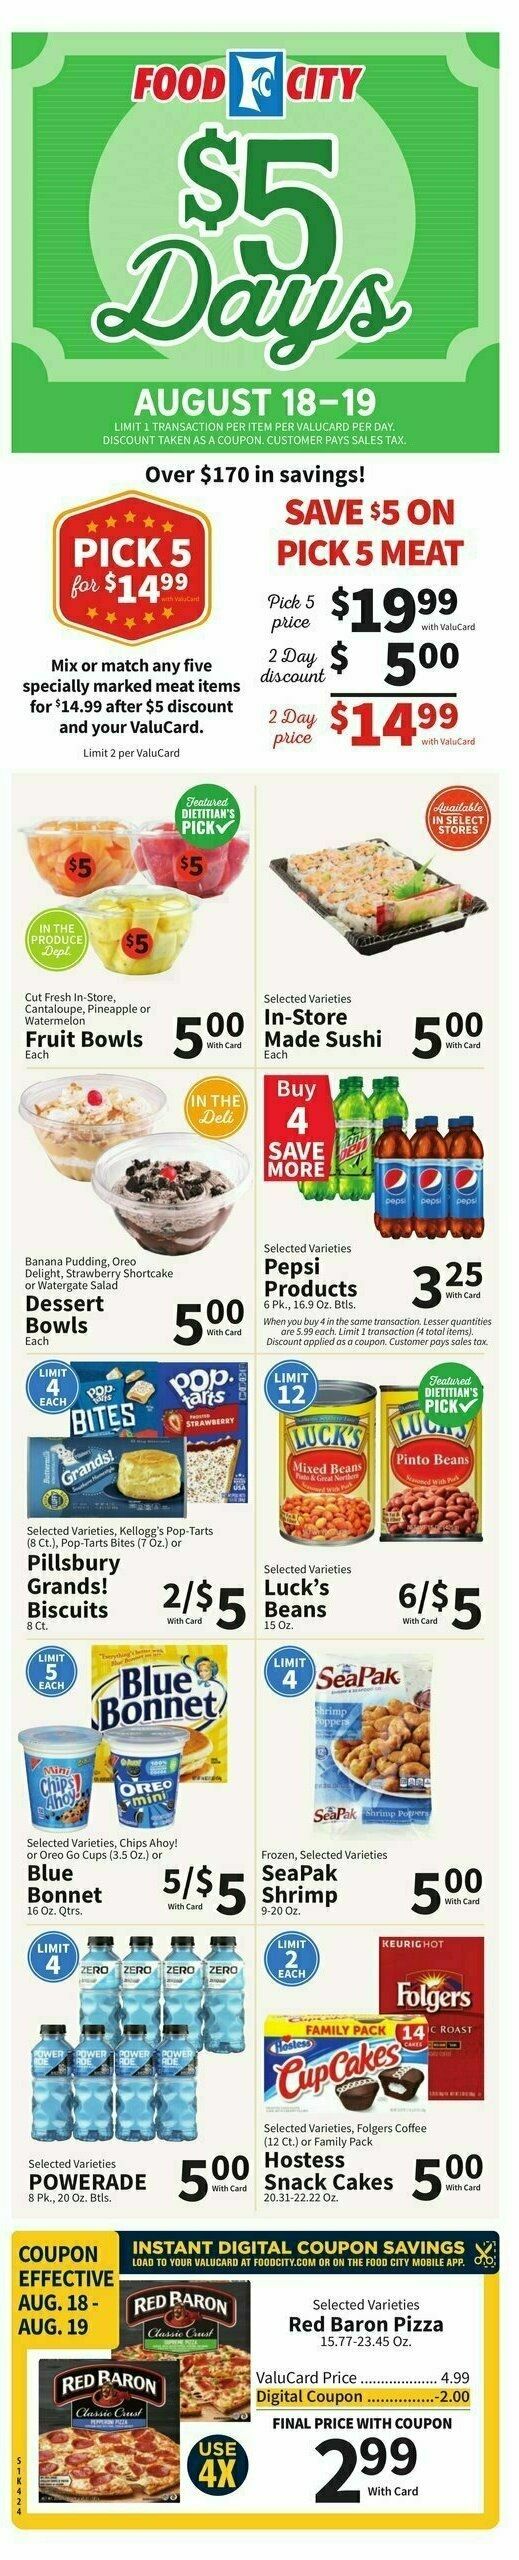 Food City Weekly Ad from August 16